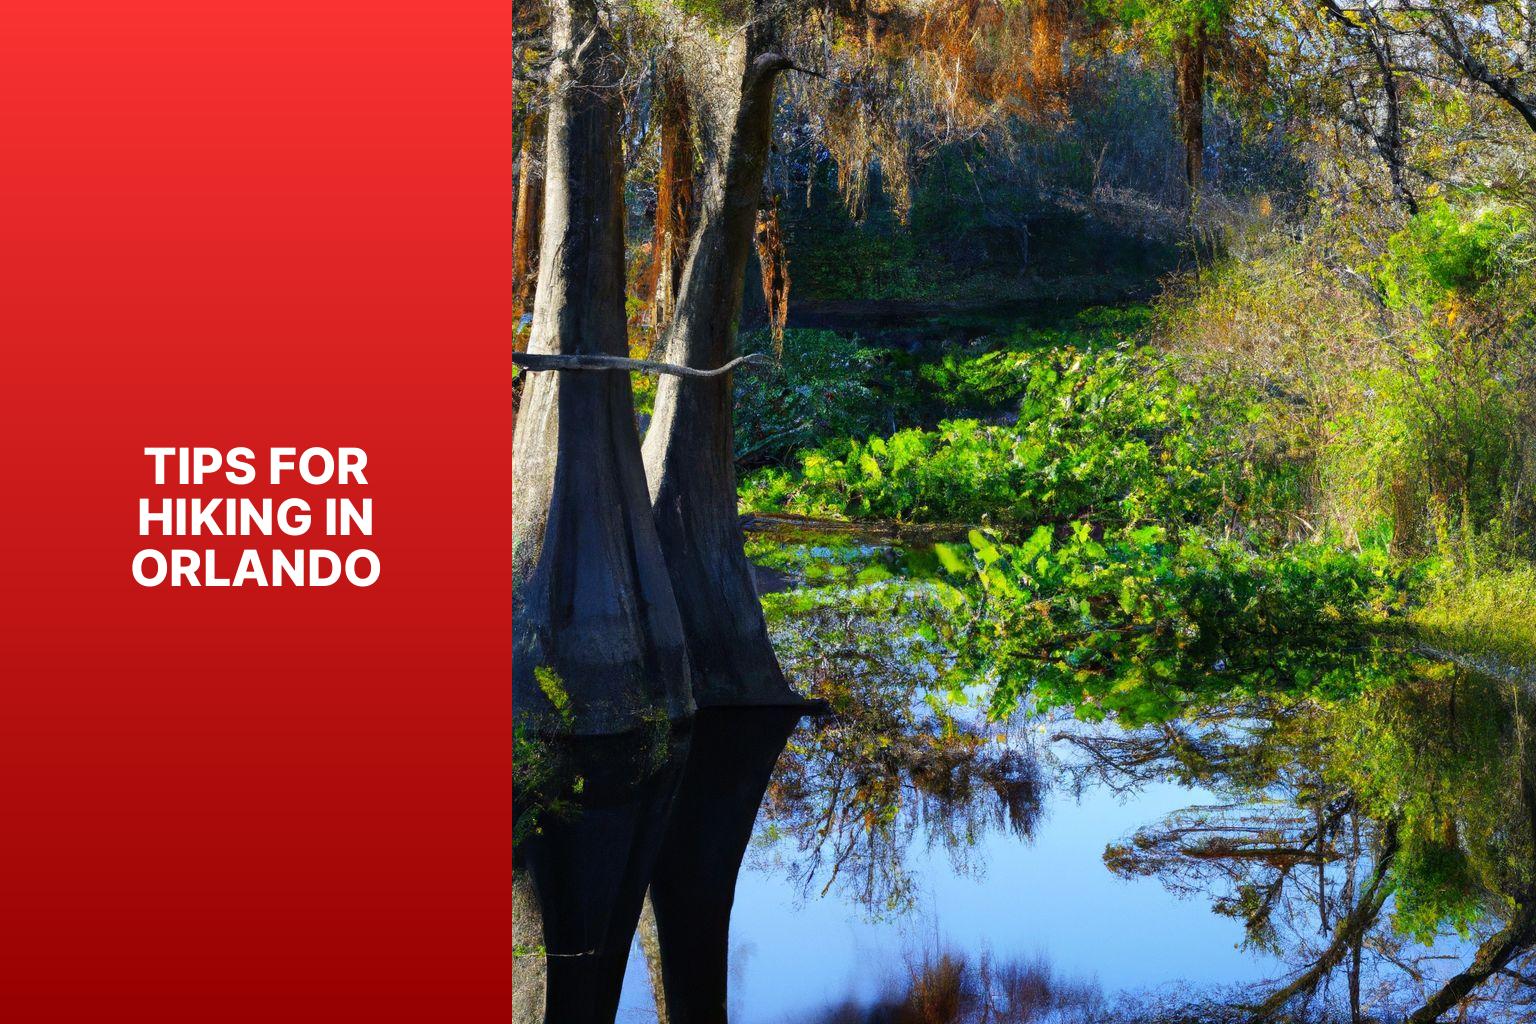 Tips for Hiking in Orlando - Hiking Trails in Orlando 